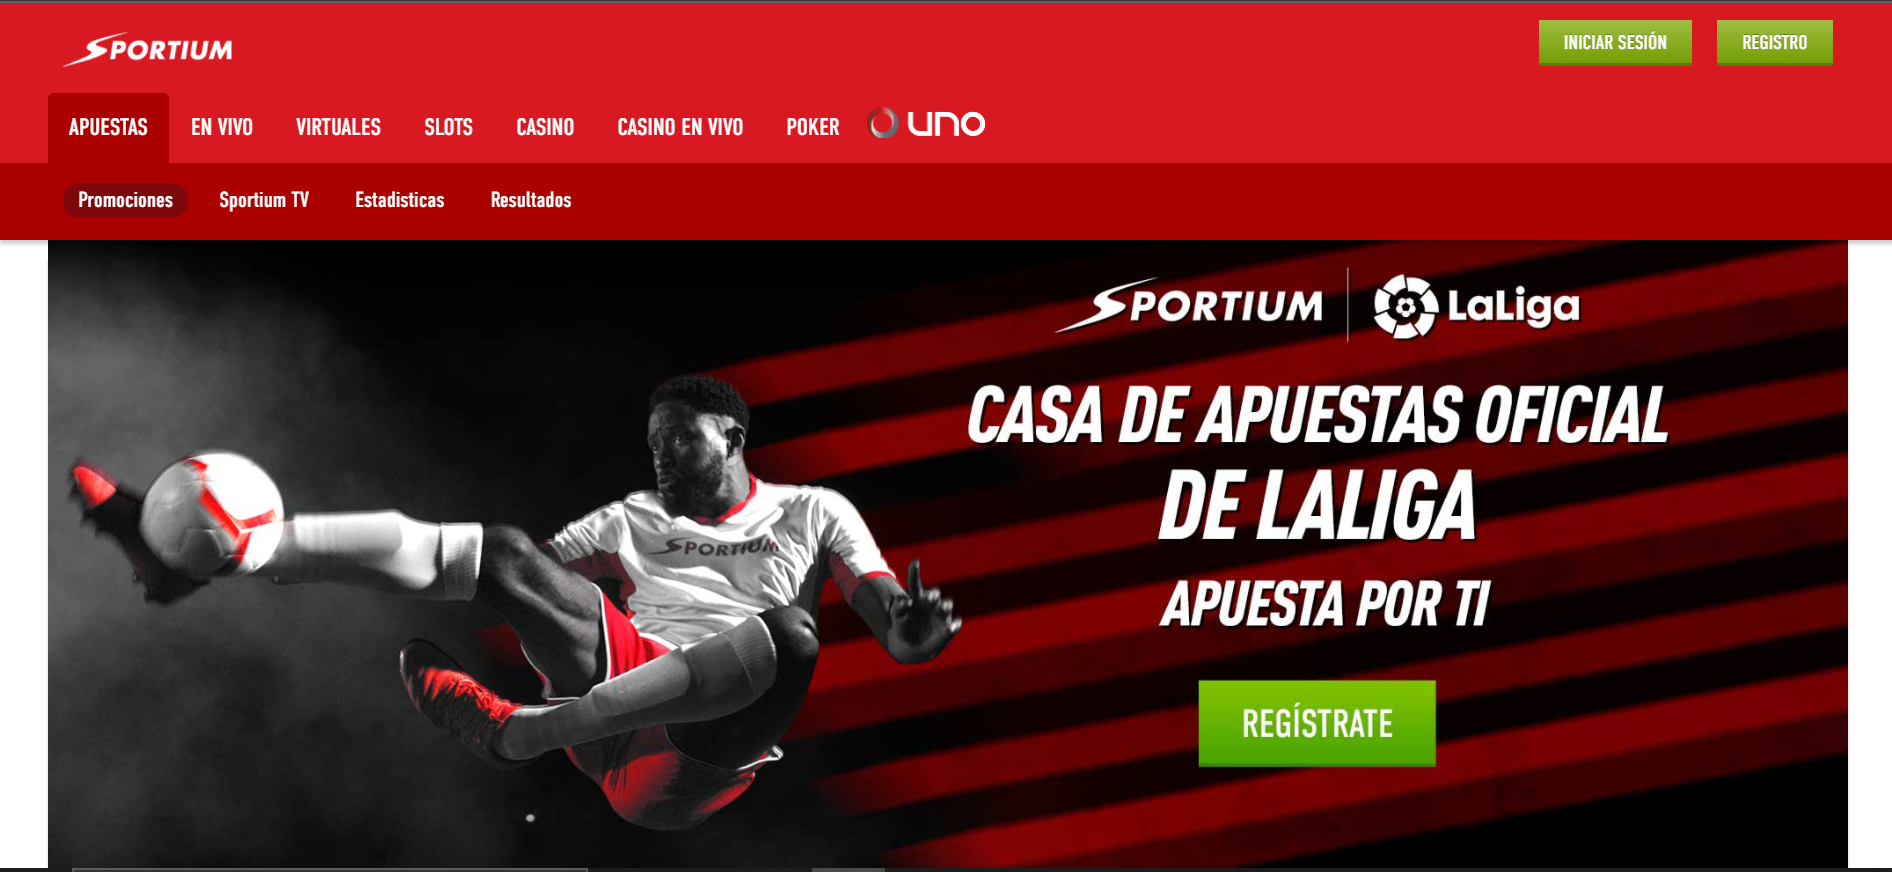 Sportium provides its customers with sports betting options and smooth payment options.